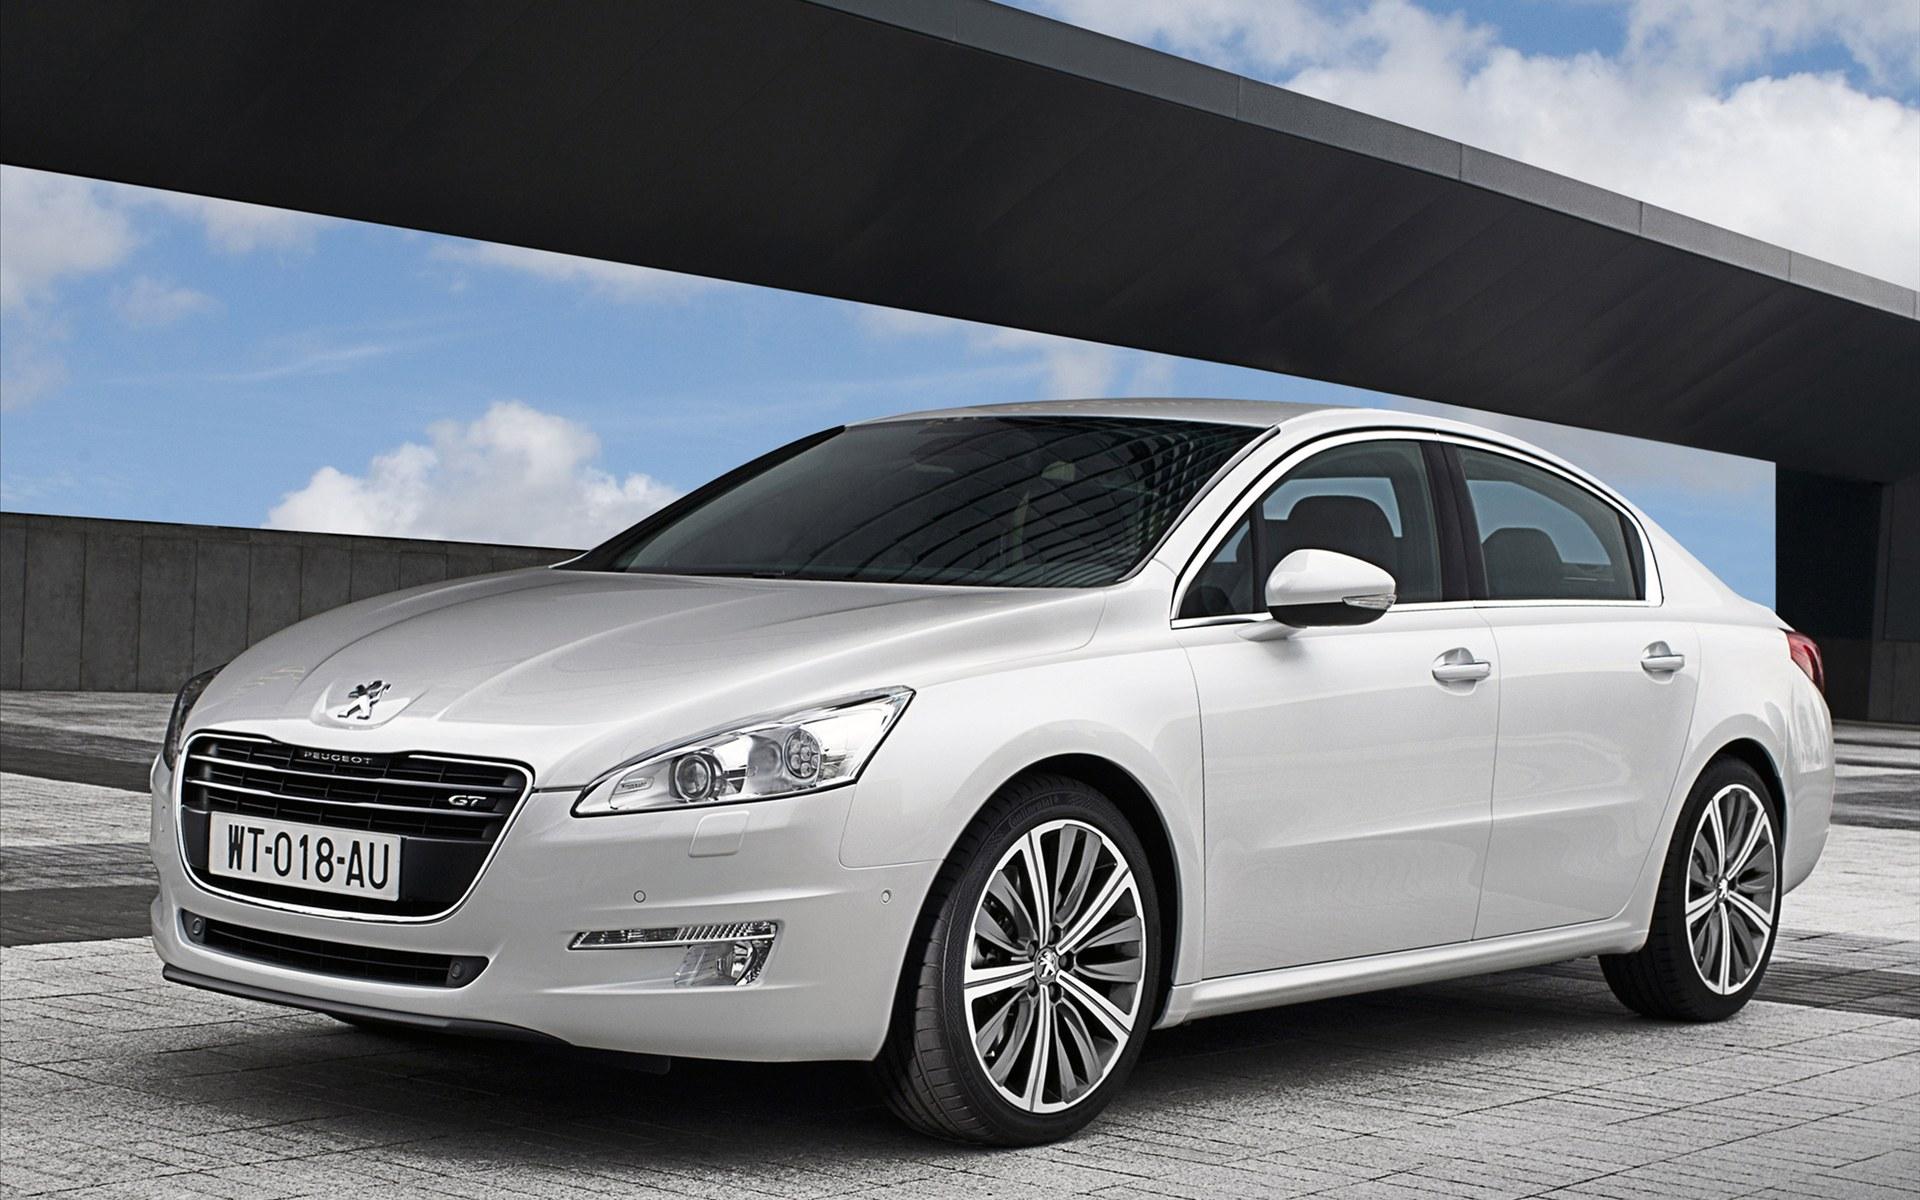 Peugeot 508. Free Desktop Wallpaper for Widescreen, HD and Mobile